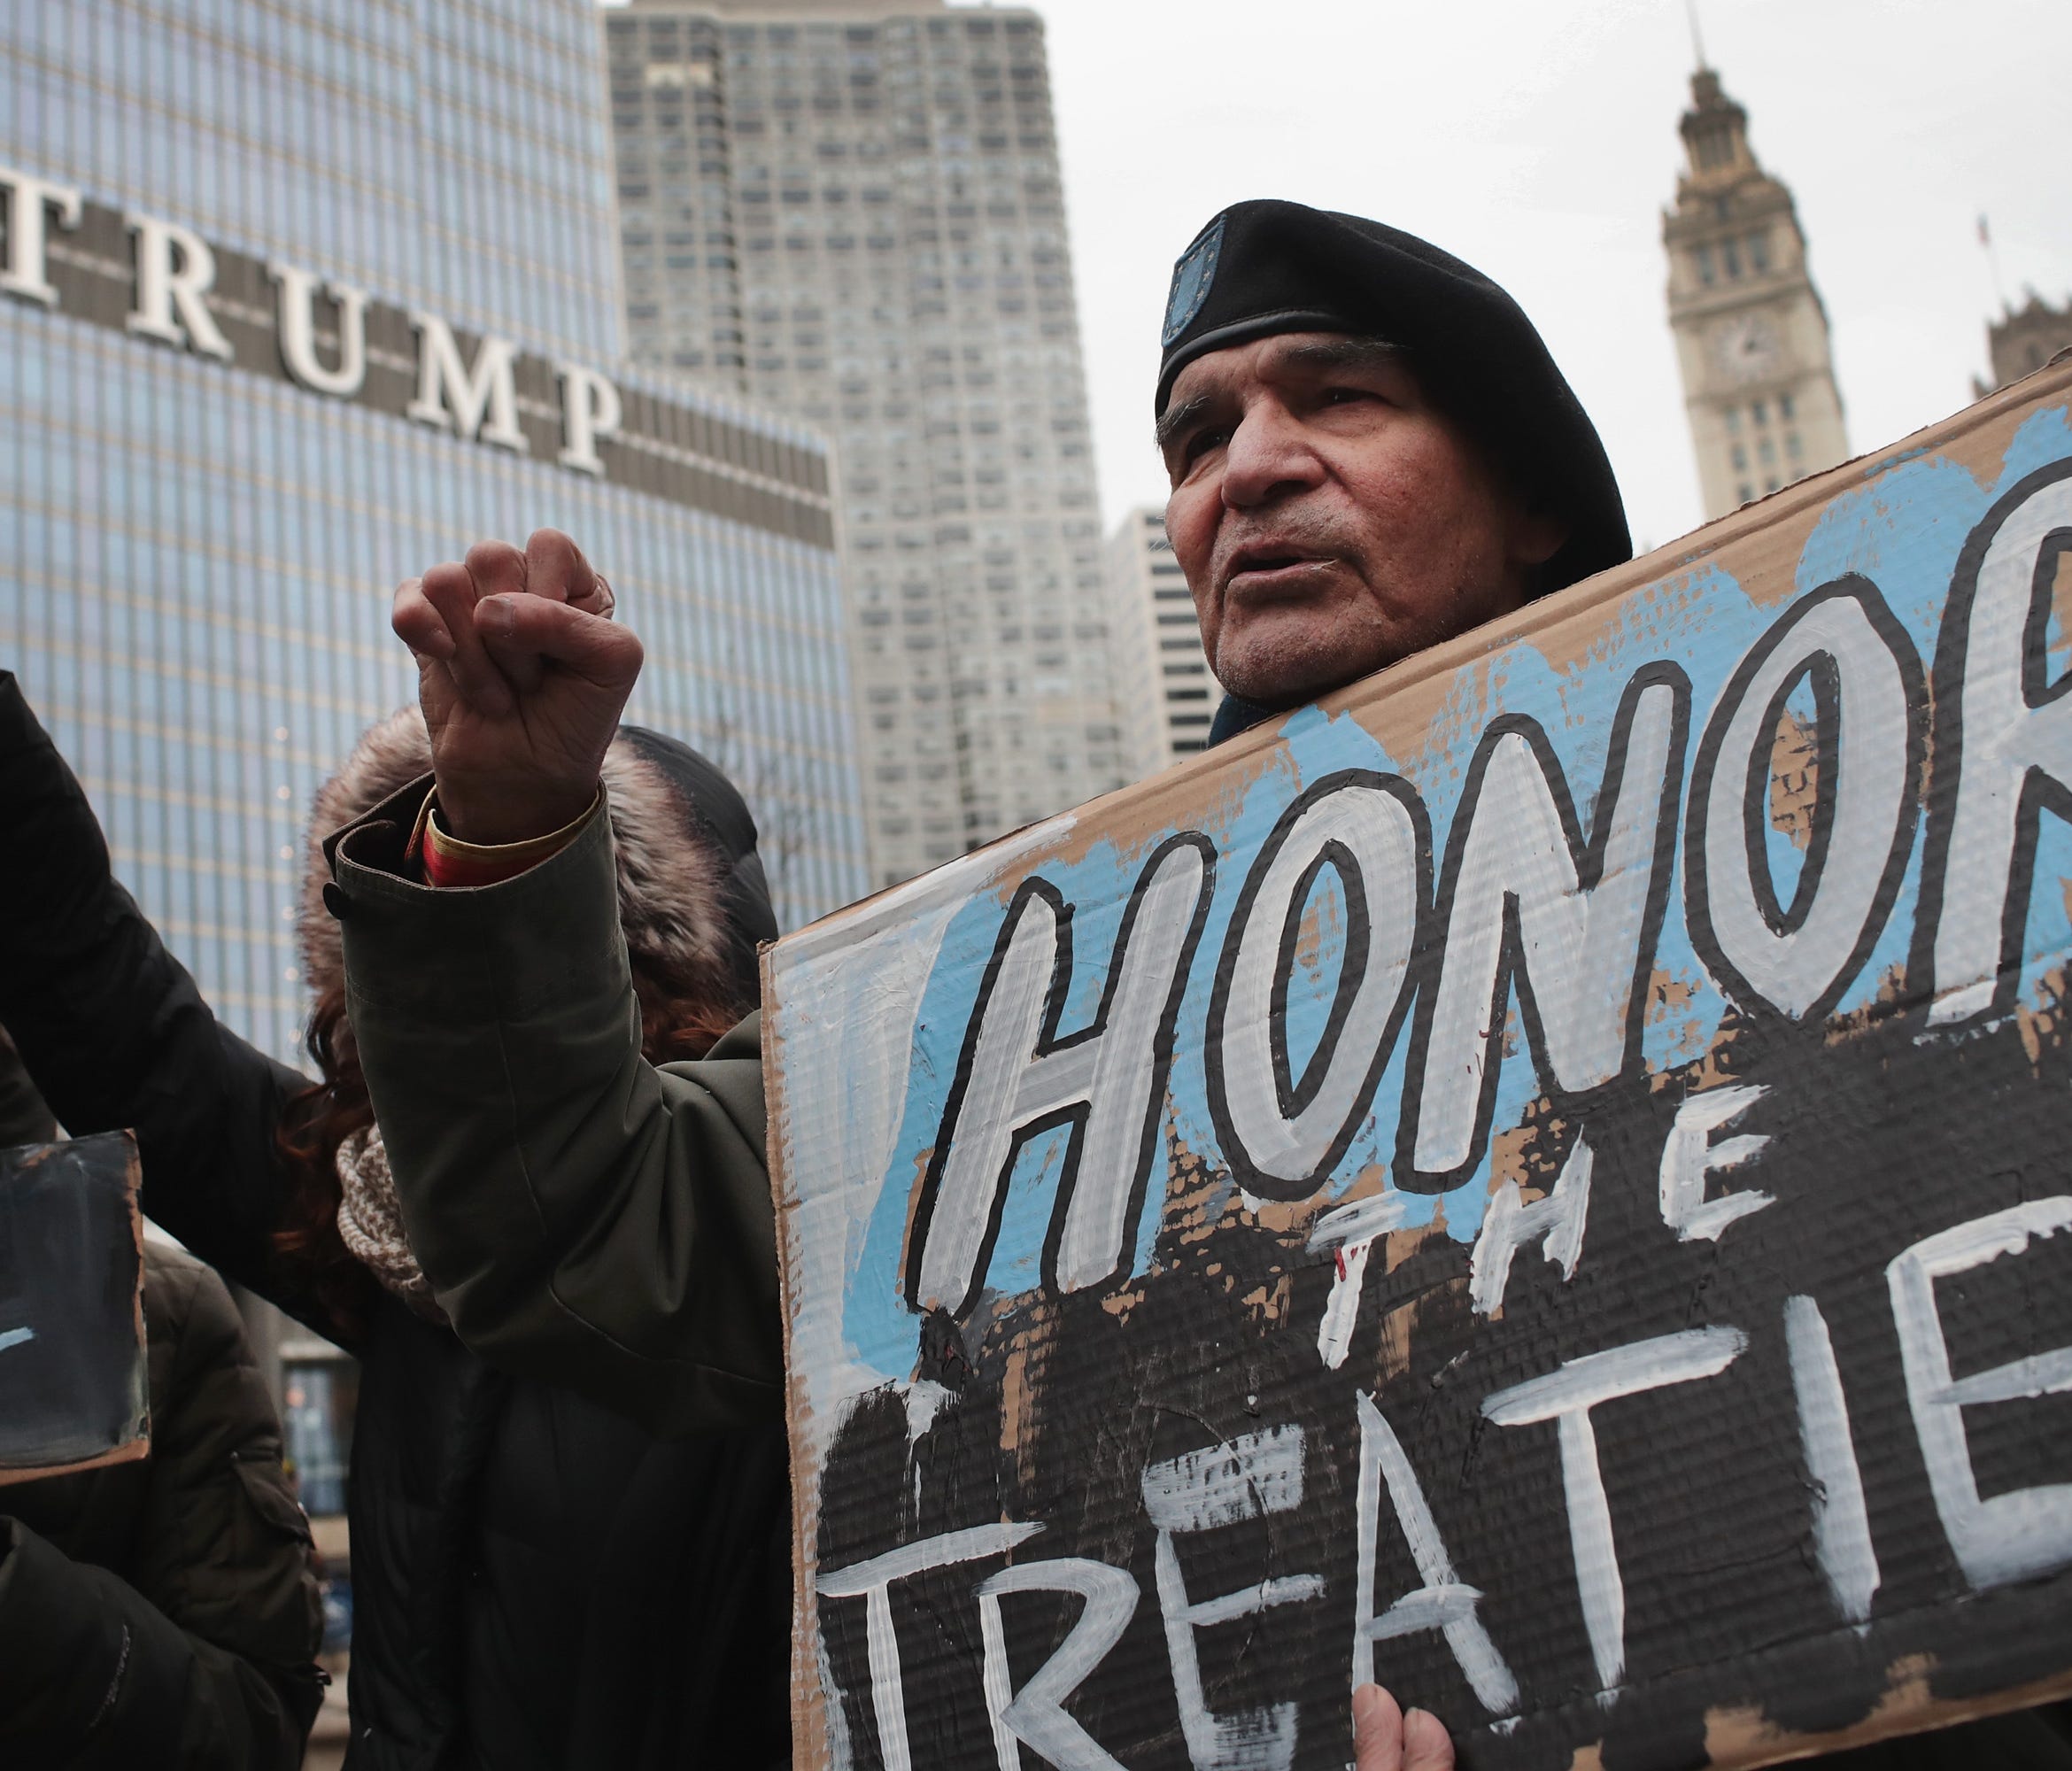 Demonstrators rally near the Trump Tower in Chicago while protesting the construction of the Dakota Access oil pipeline.